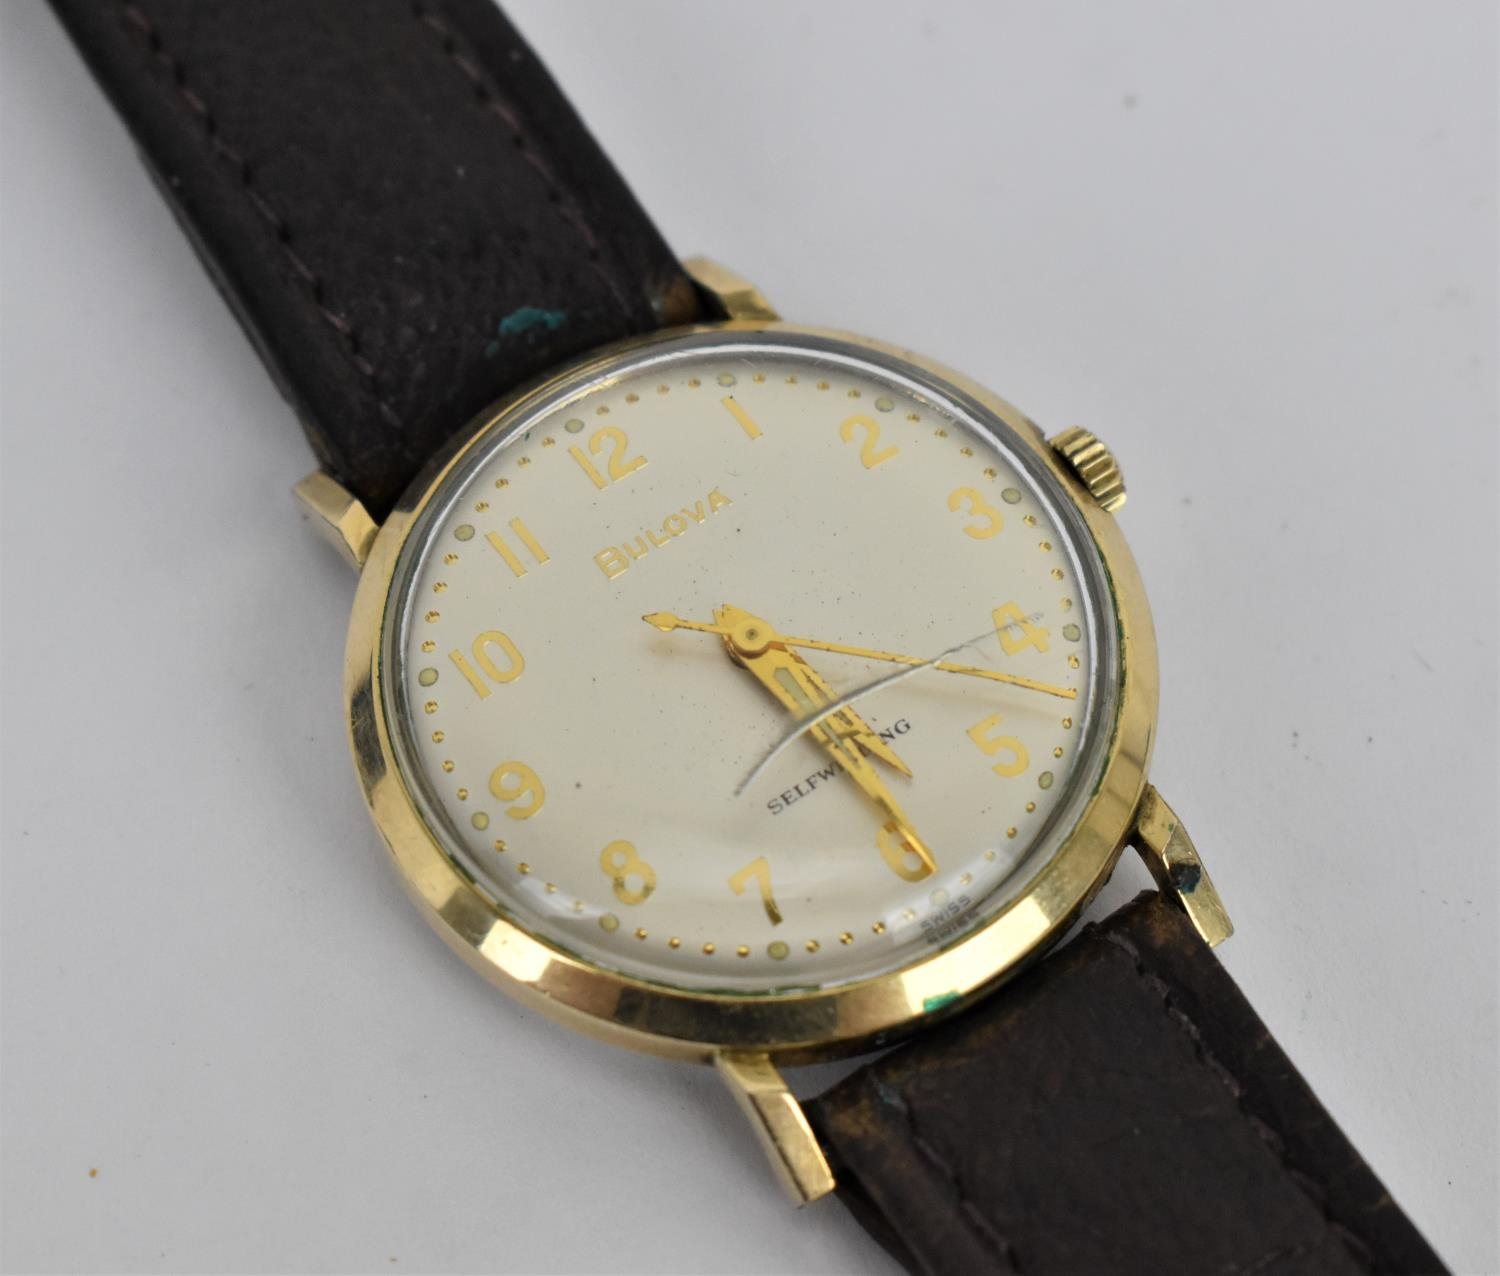 A vintage 1964 gents gold plated Automatic Bulova having a silvered dial with Arabic numerals and